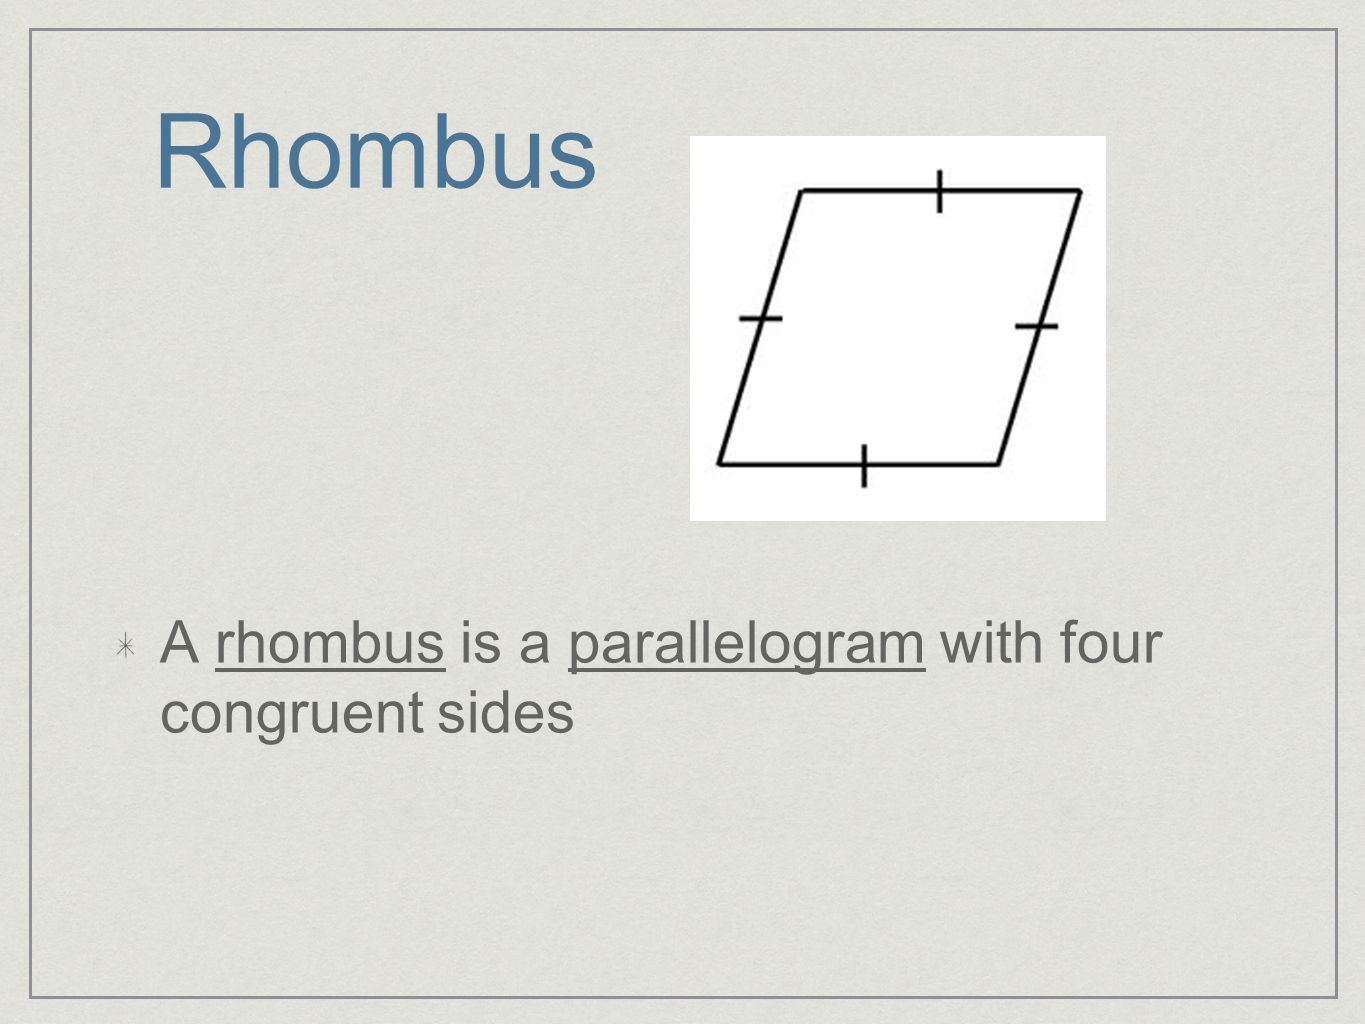 Rhombus A rhombus is a parallelogram with four congruent sides